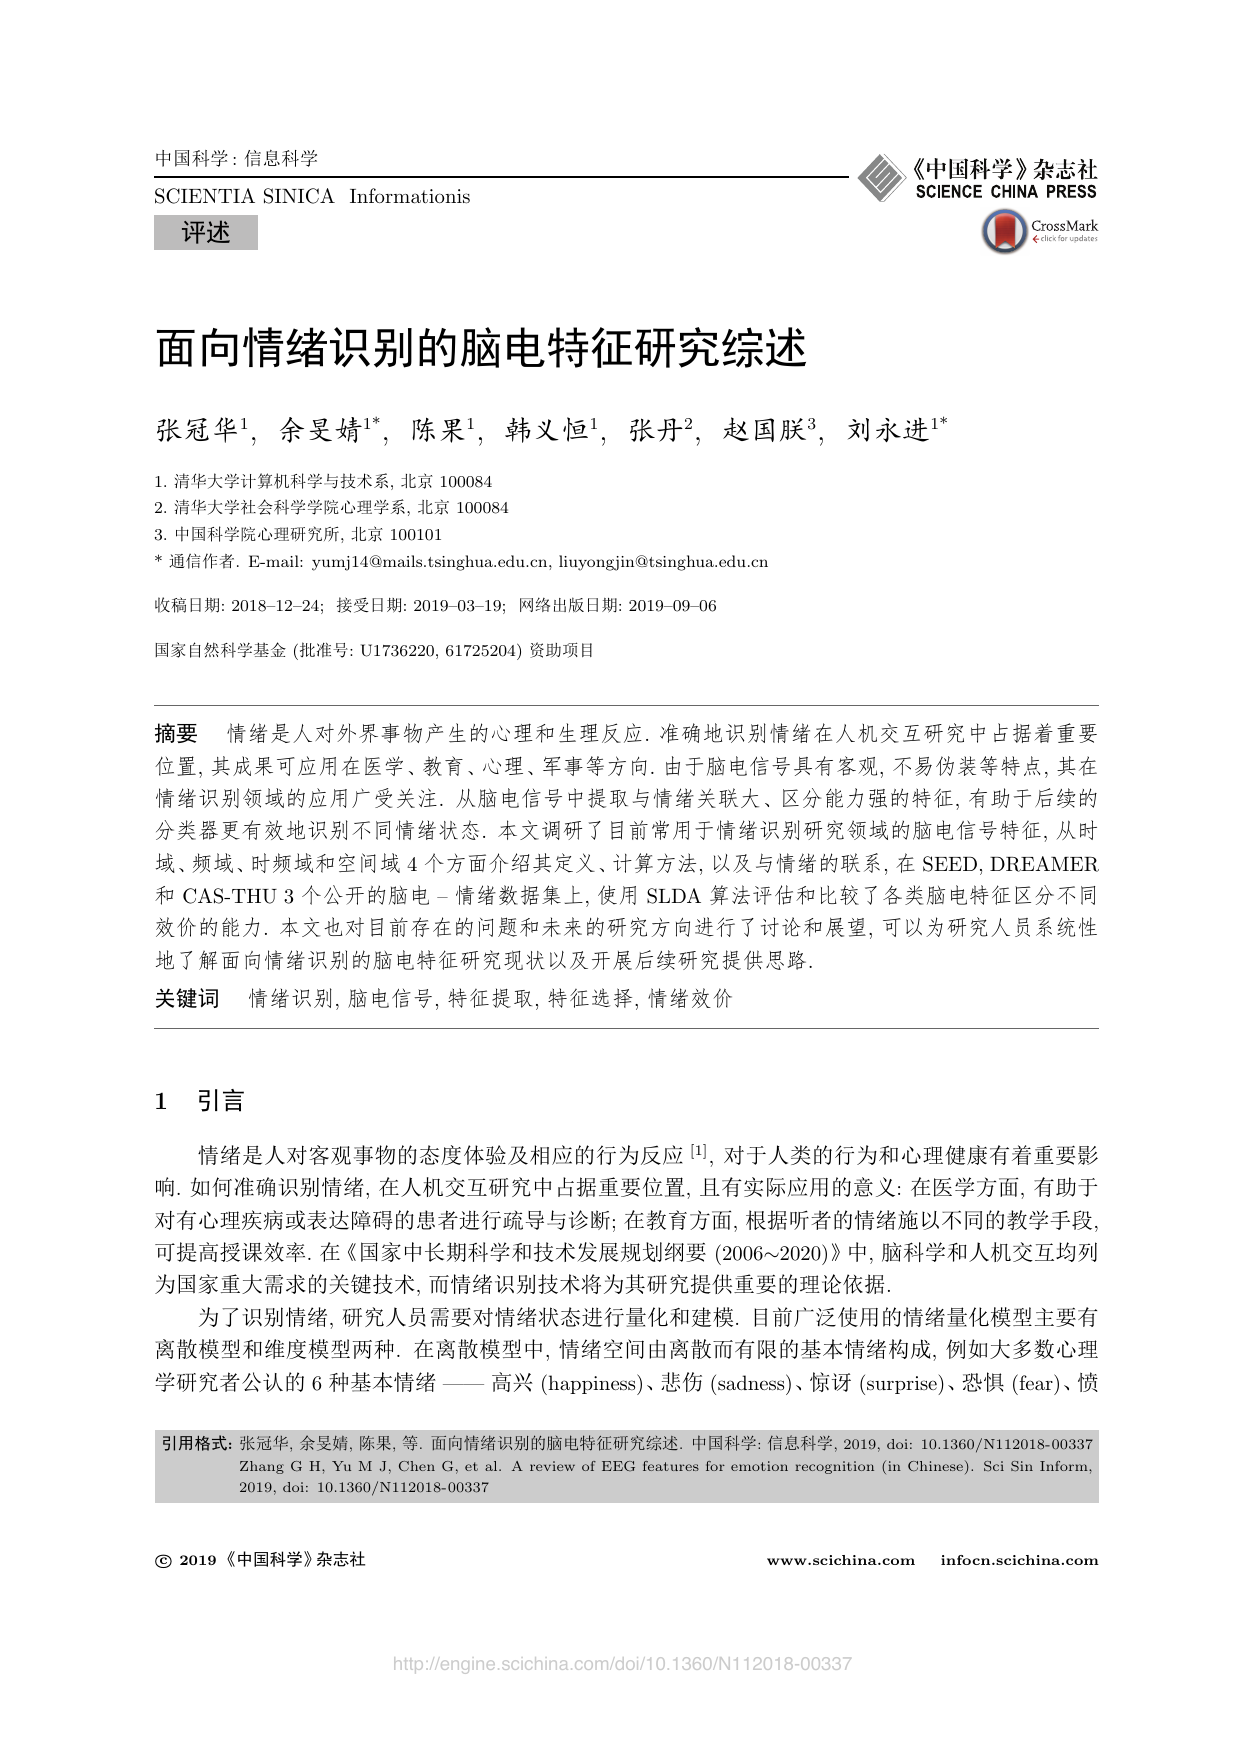 A Review of EEG Features for Emotion Recognition (in Chinese)